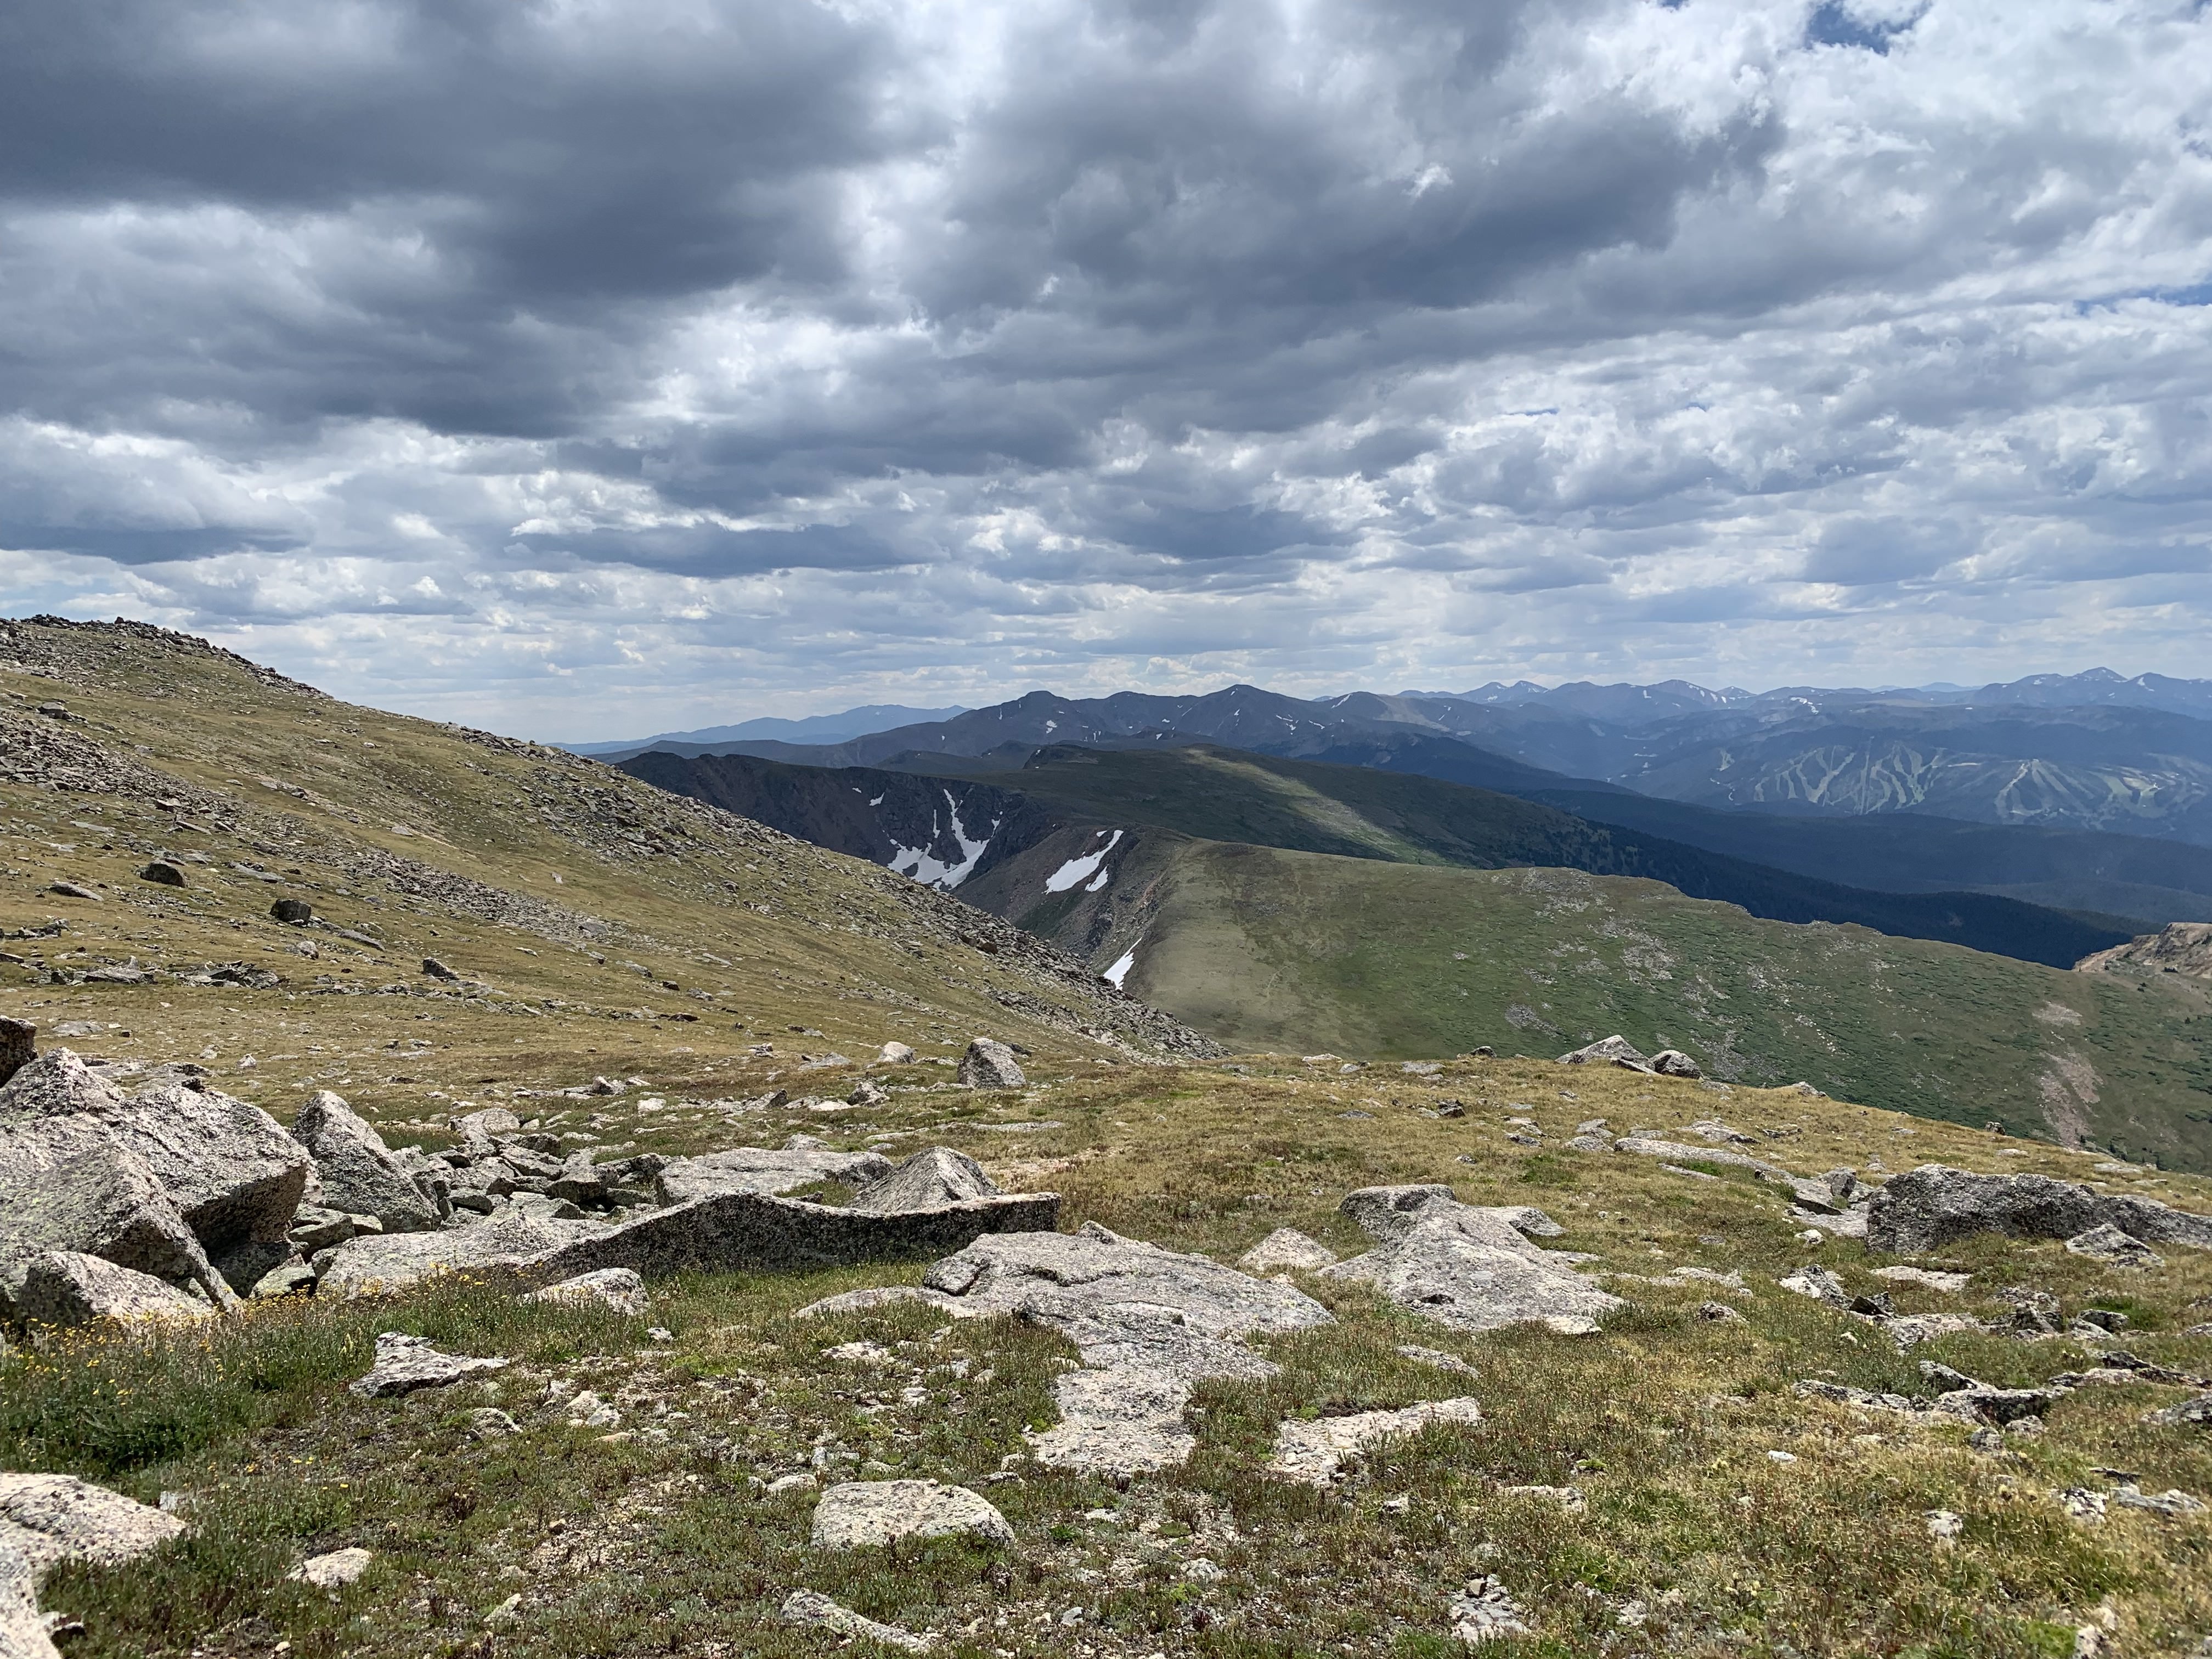 Traveling along the divide. James Peak can be seen on the left, the end is finally in sight.